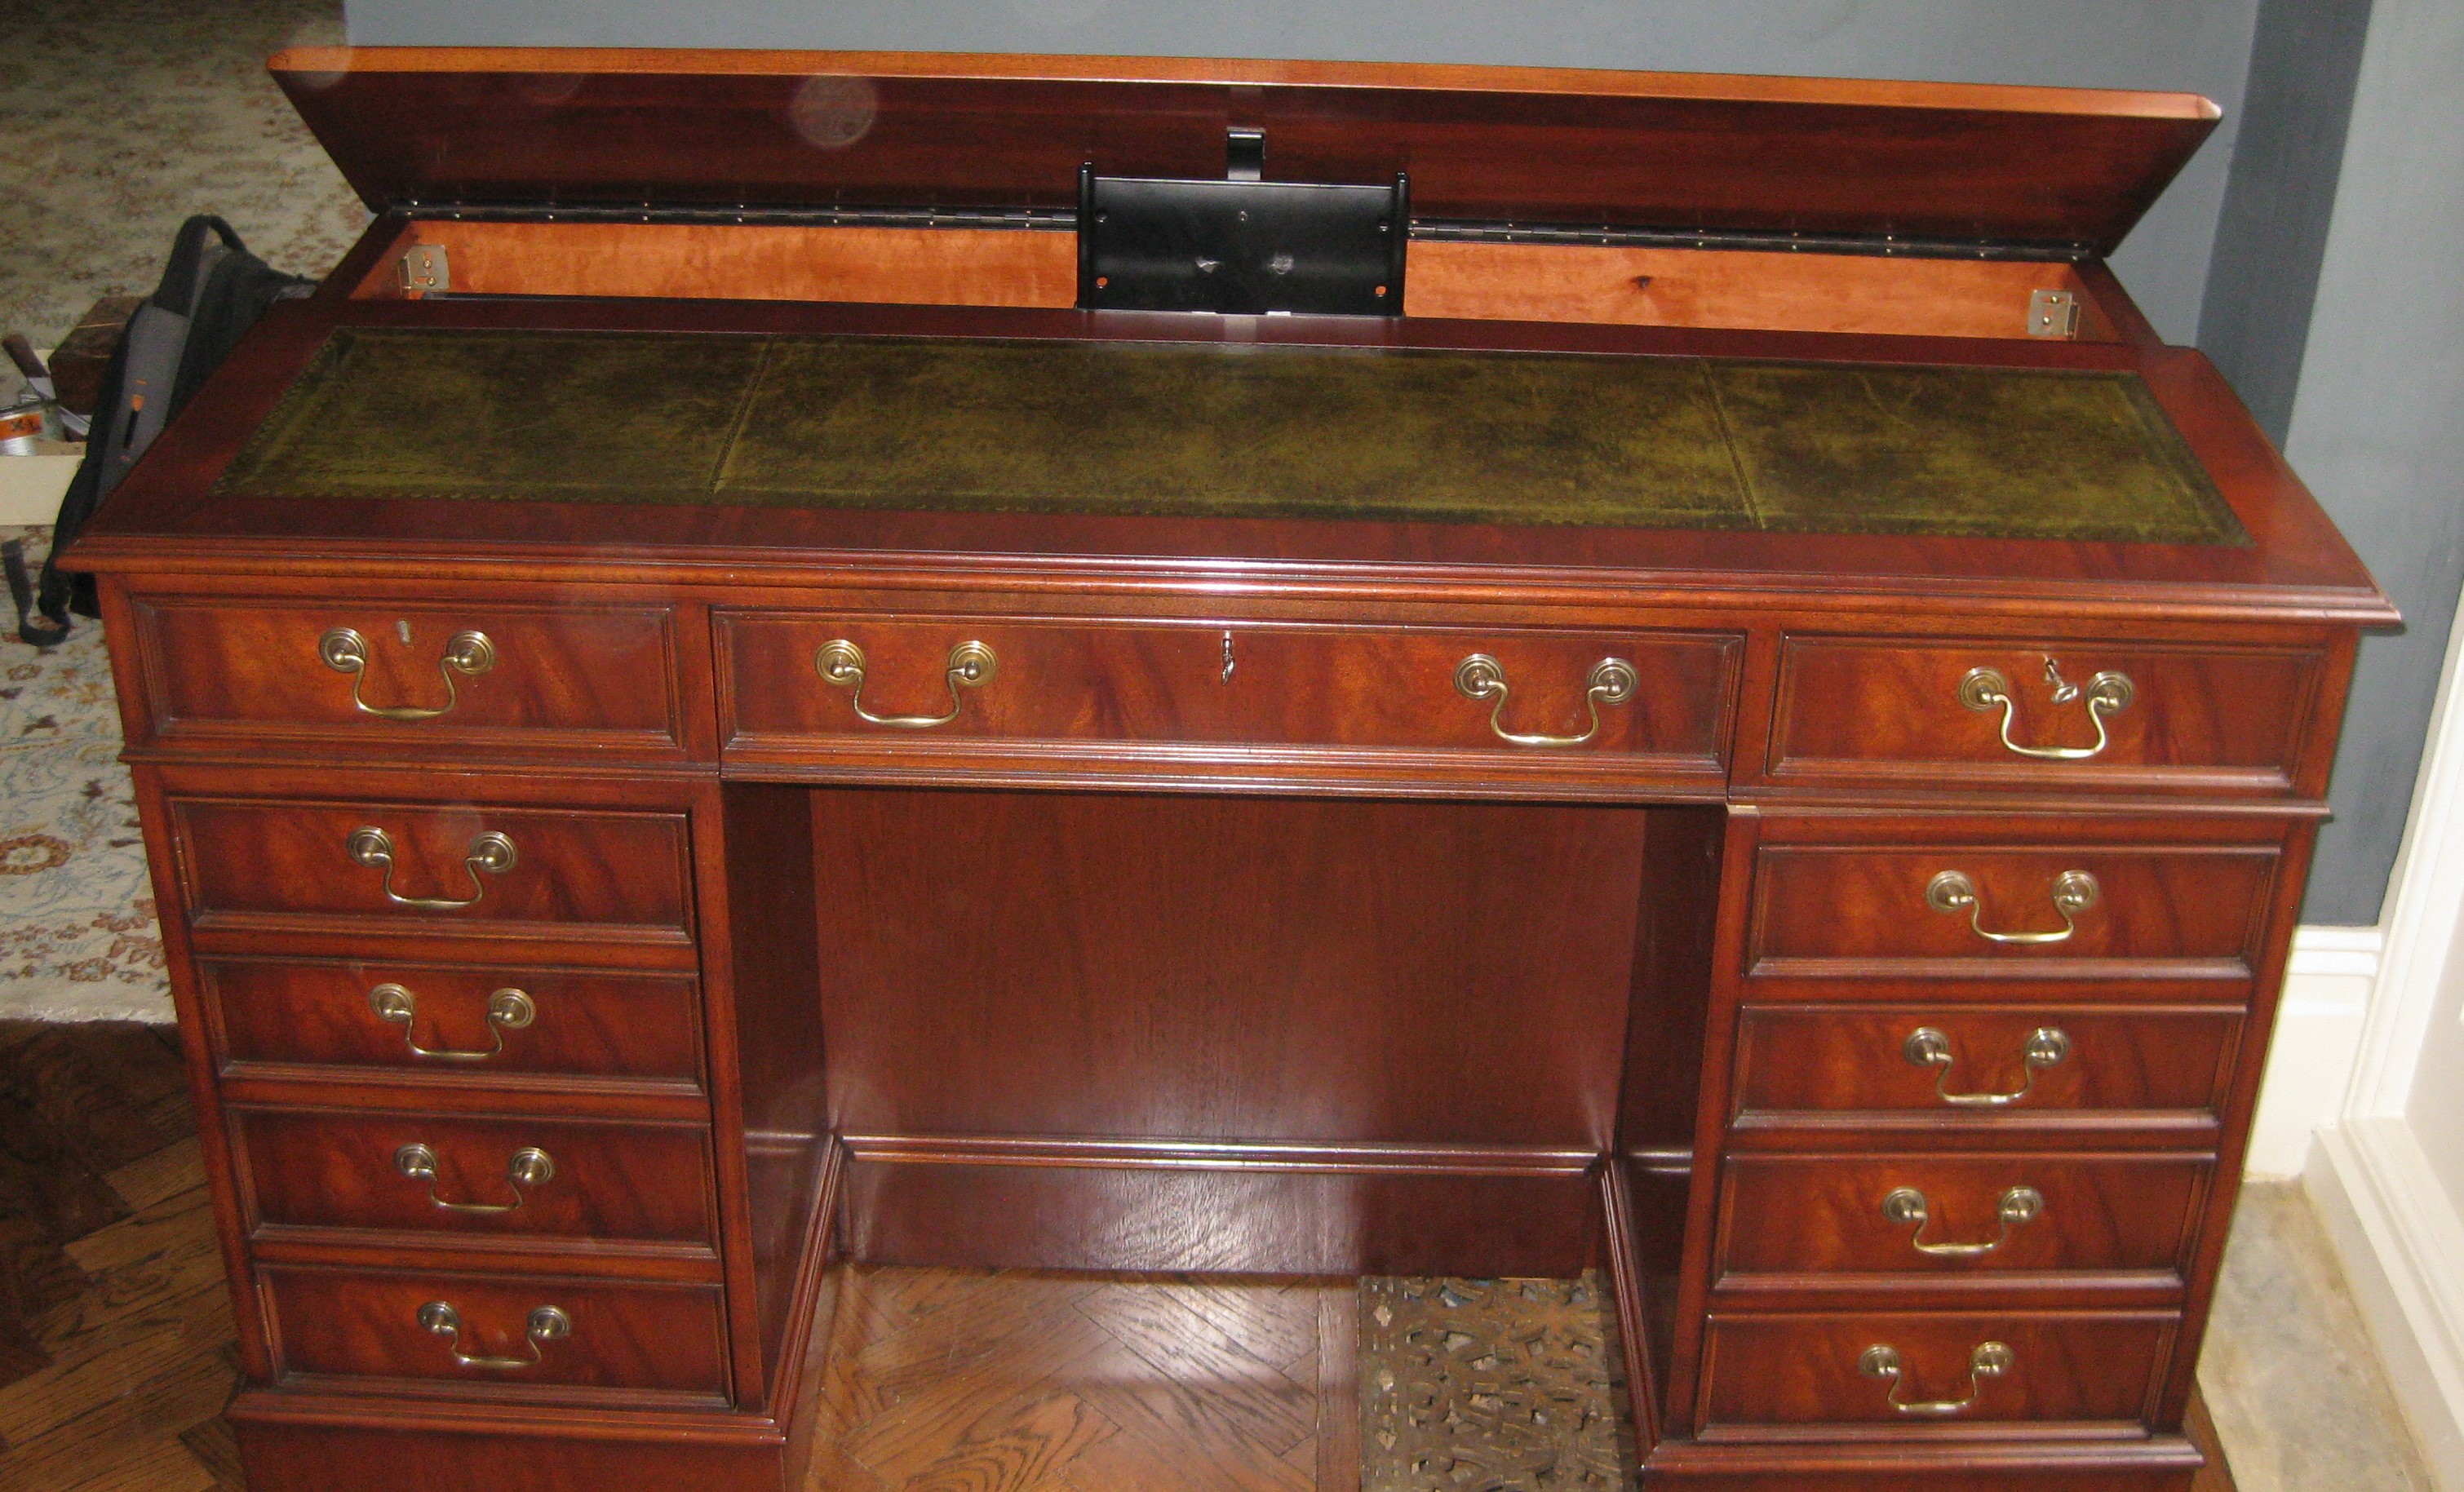 Reproduction Computer Desk With Automatic Lift Mechanism Dorking